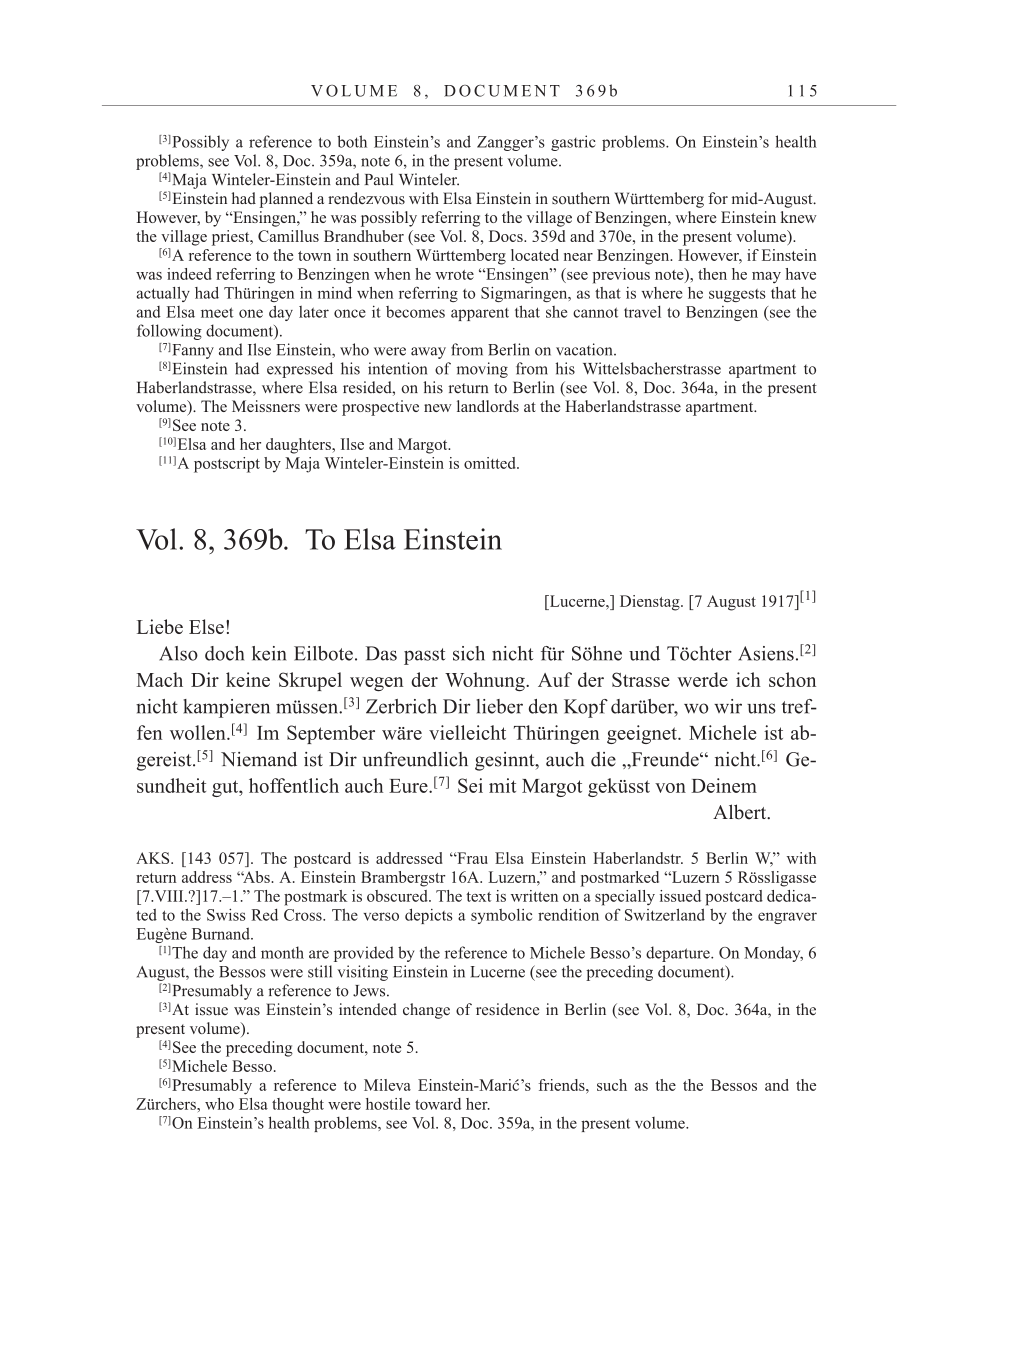 Volume 10: The Berlin Years: Correspondence May-December 1920 / Supplementary Correspondence 1909-1920 page 115